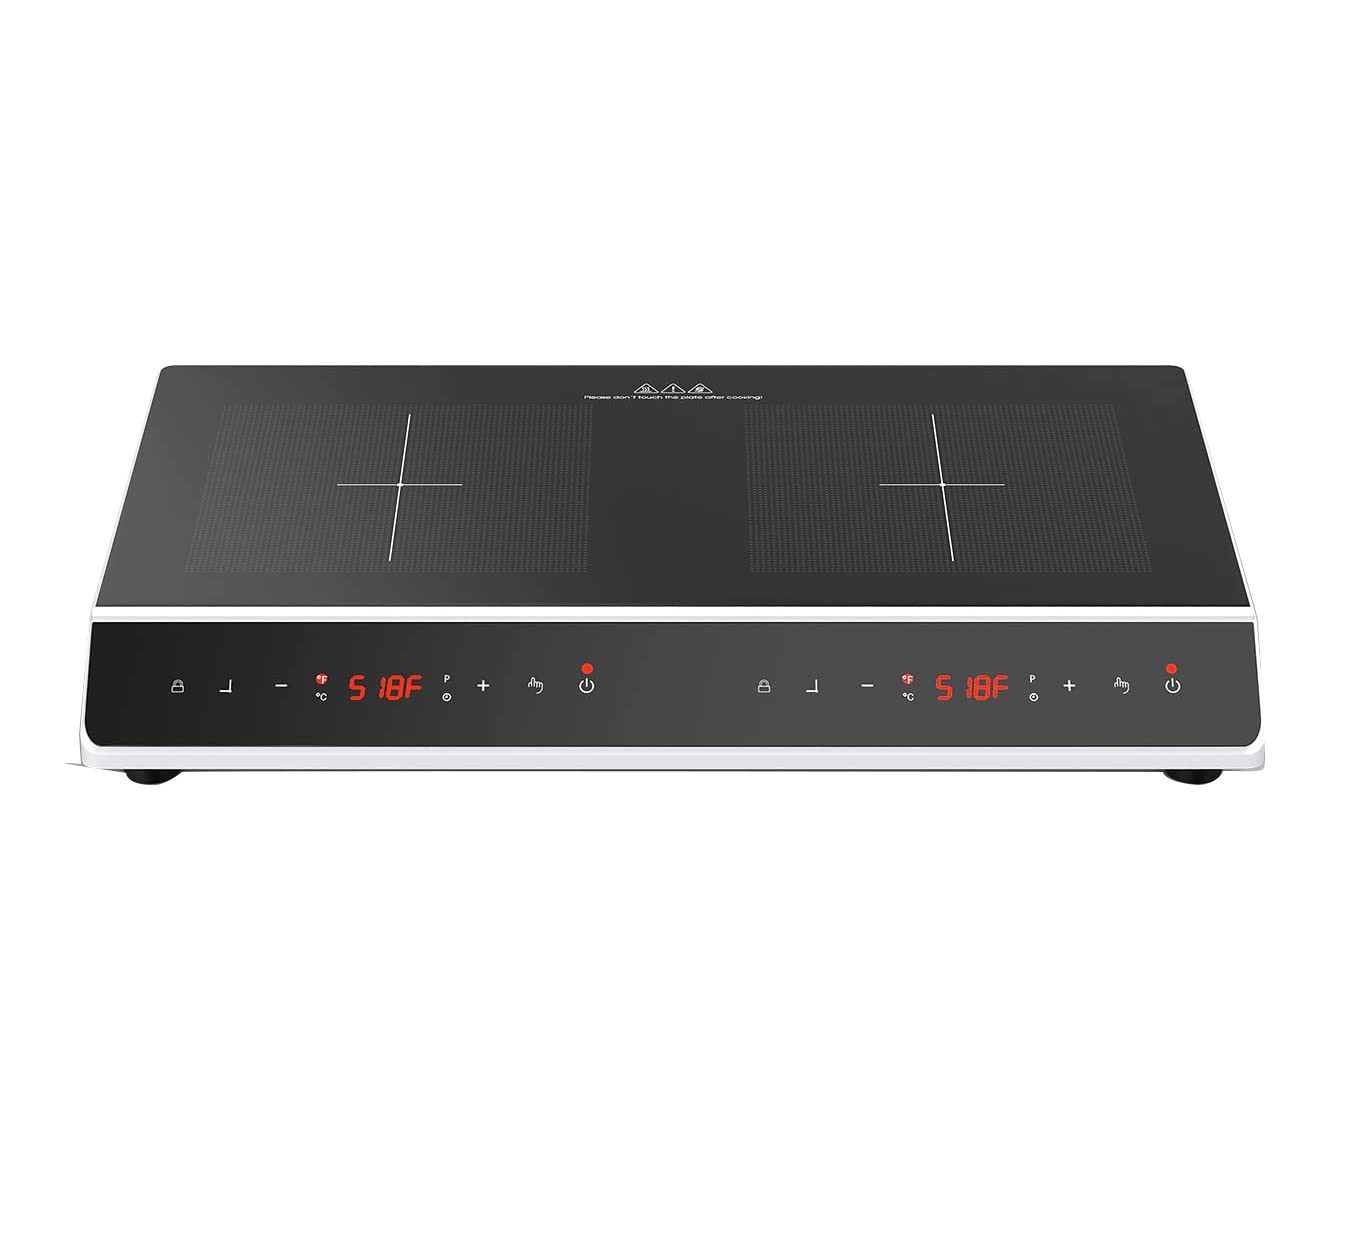 Double Induction Cooktop, 110V Electric Cooktop Hot Plate LCD Sensor Touch Energy-Saving Portable Induction Cooktop 2 Burner,9 Temperature,with Child Safety Lock & Timer